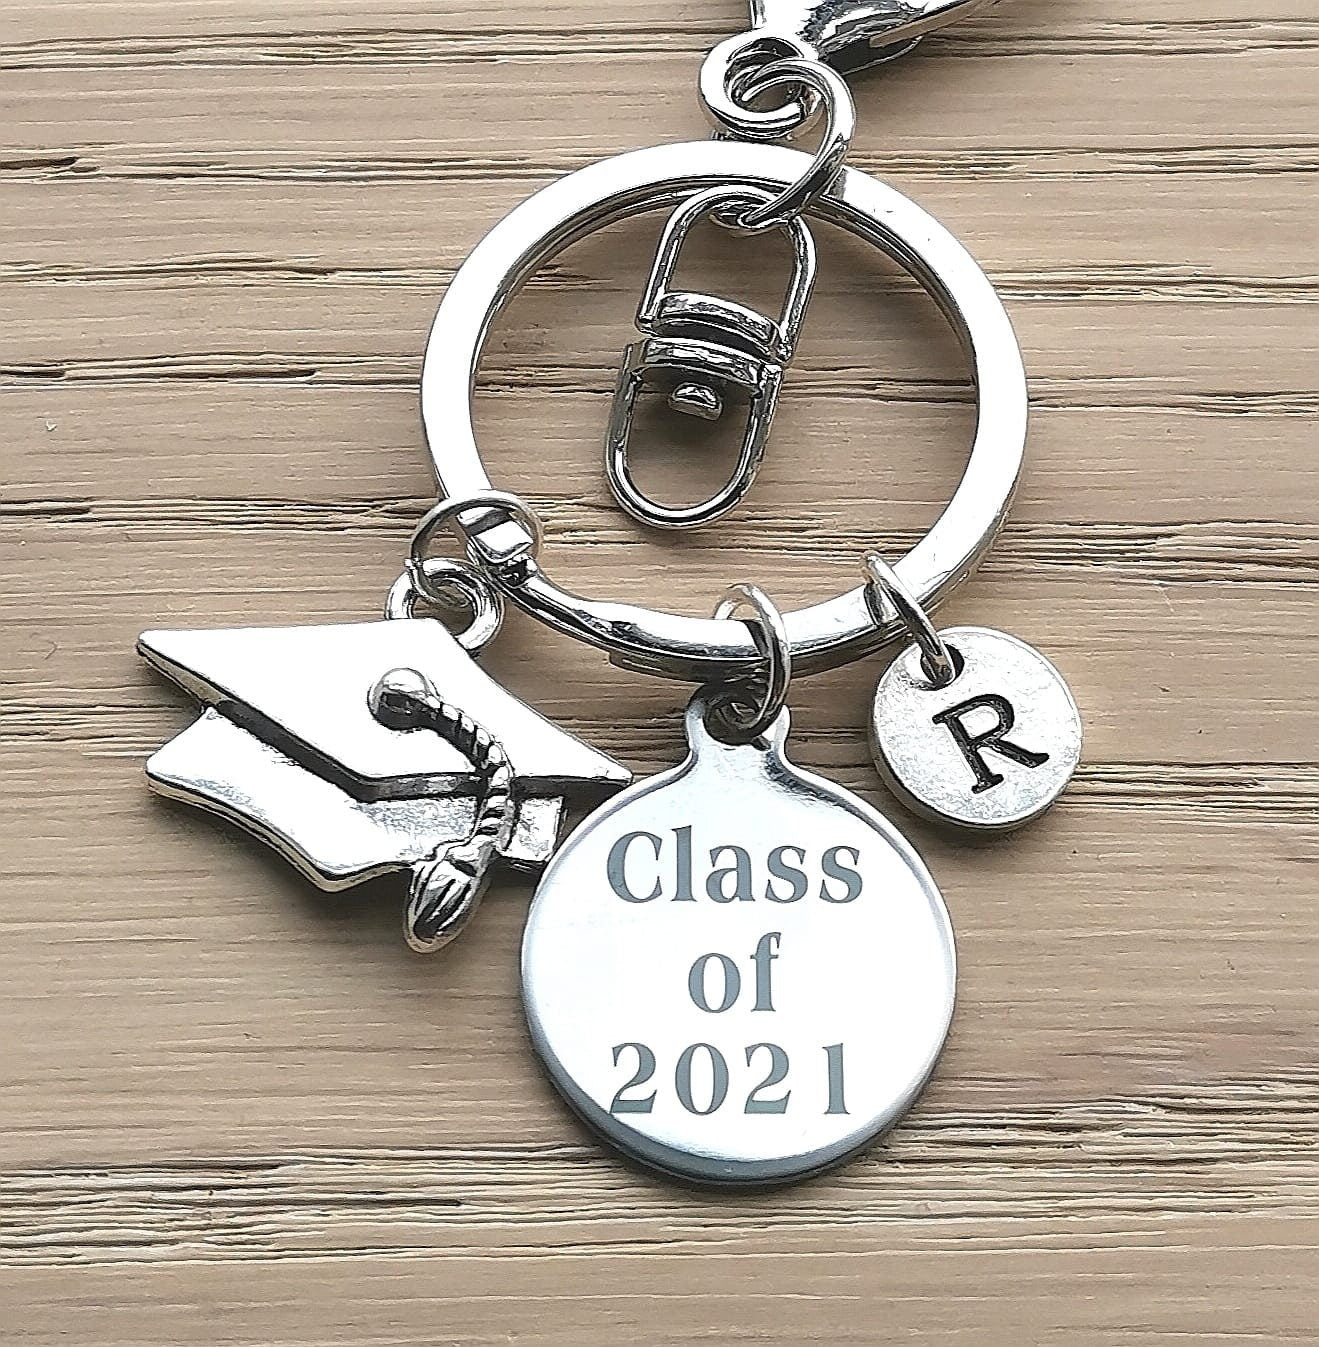 Class of 2021, 2021 leavers gift , 2021 Graduation gift, Class of 2021 graduation gift for him, graduation gift, graduation keyring, grad